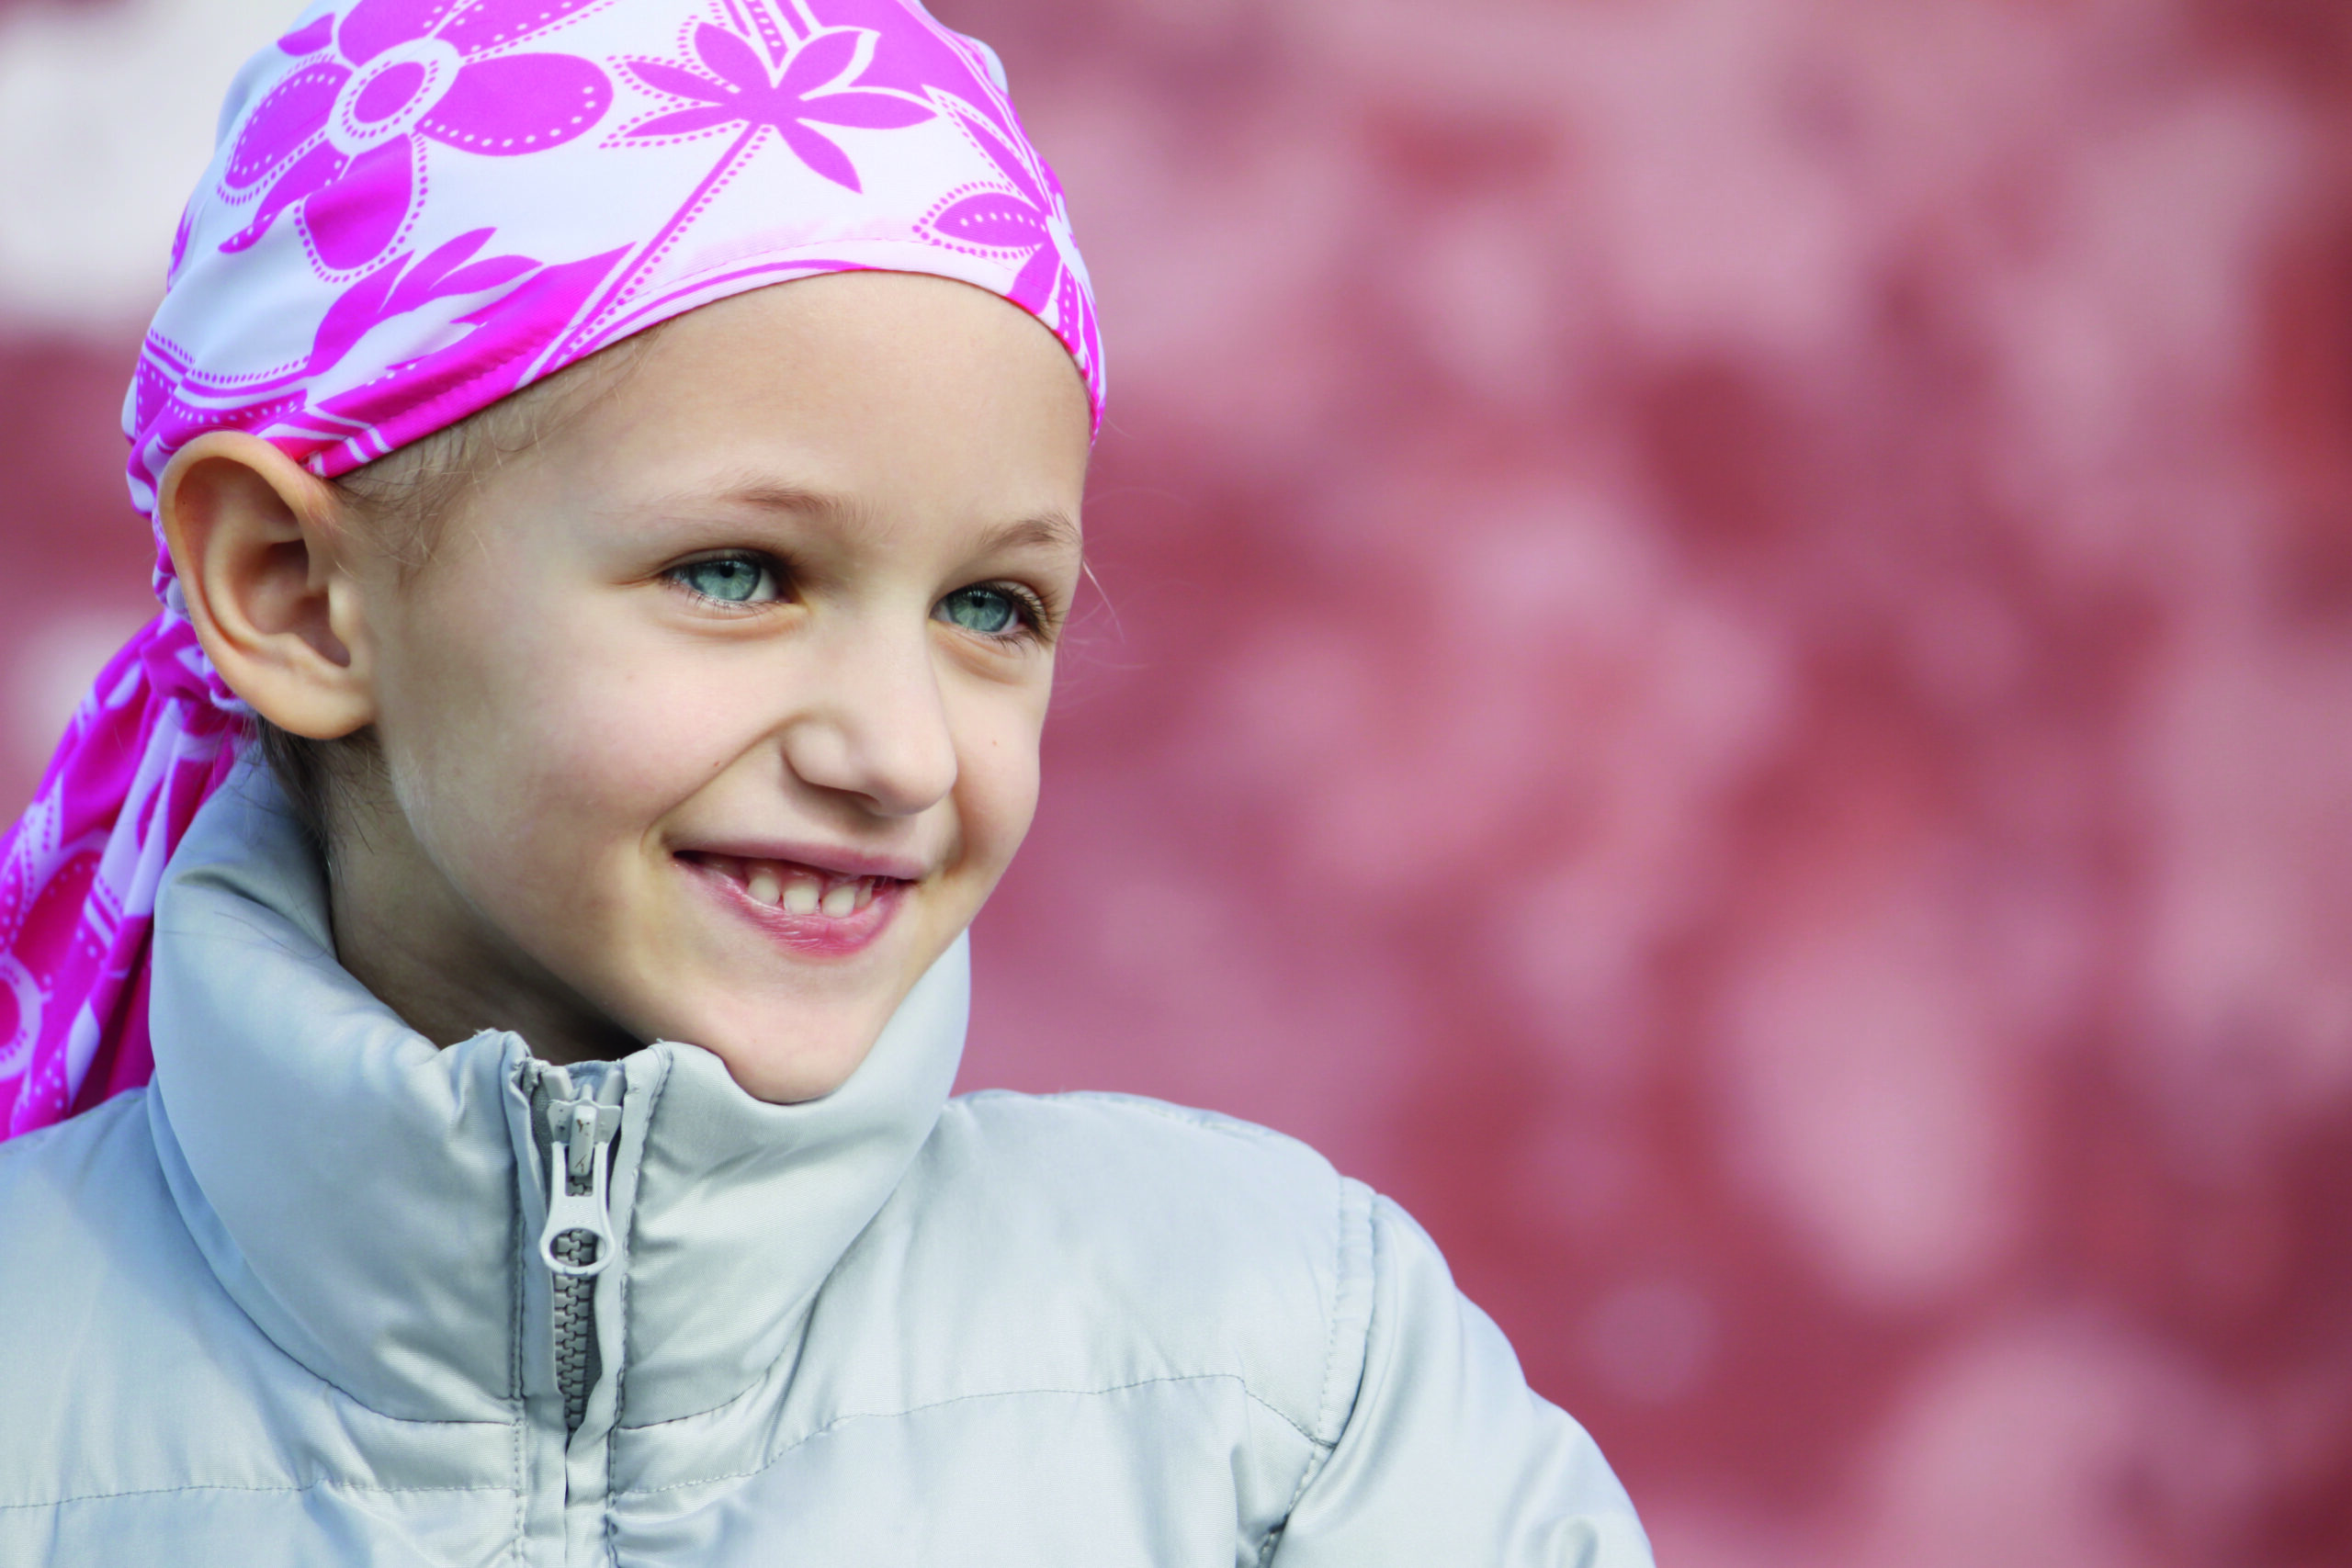 Smiling child wearing a headscarf